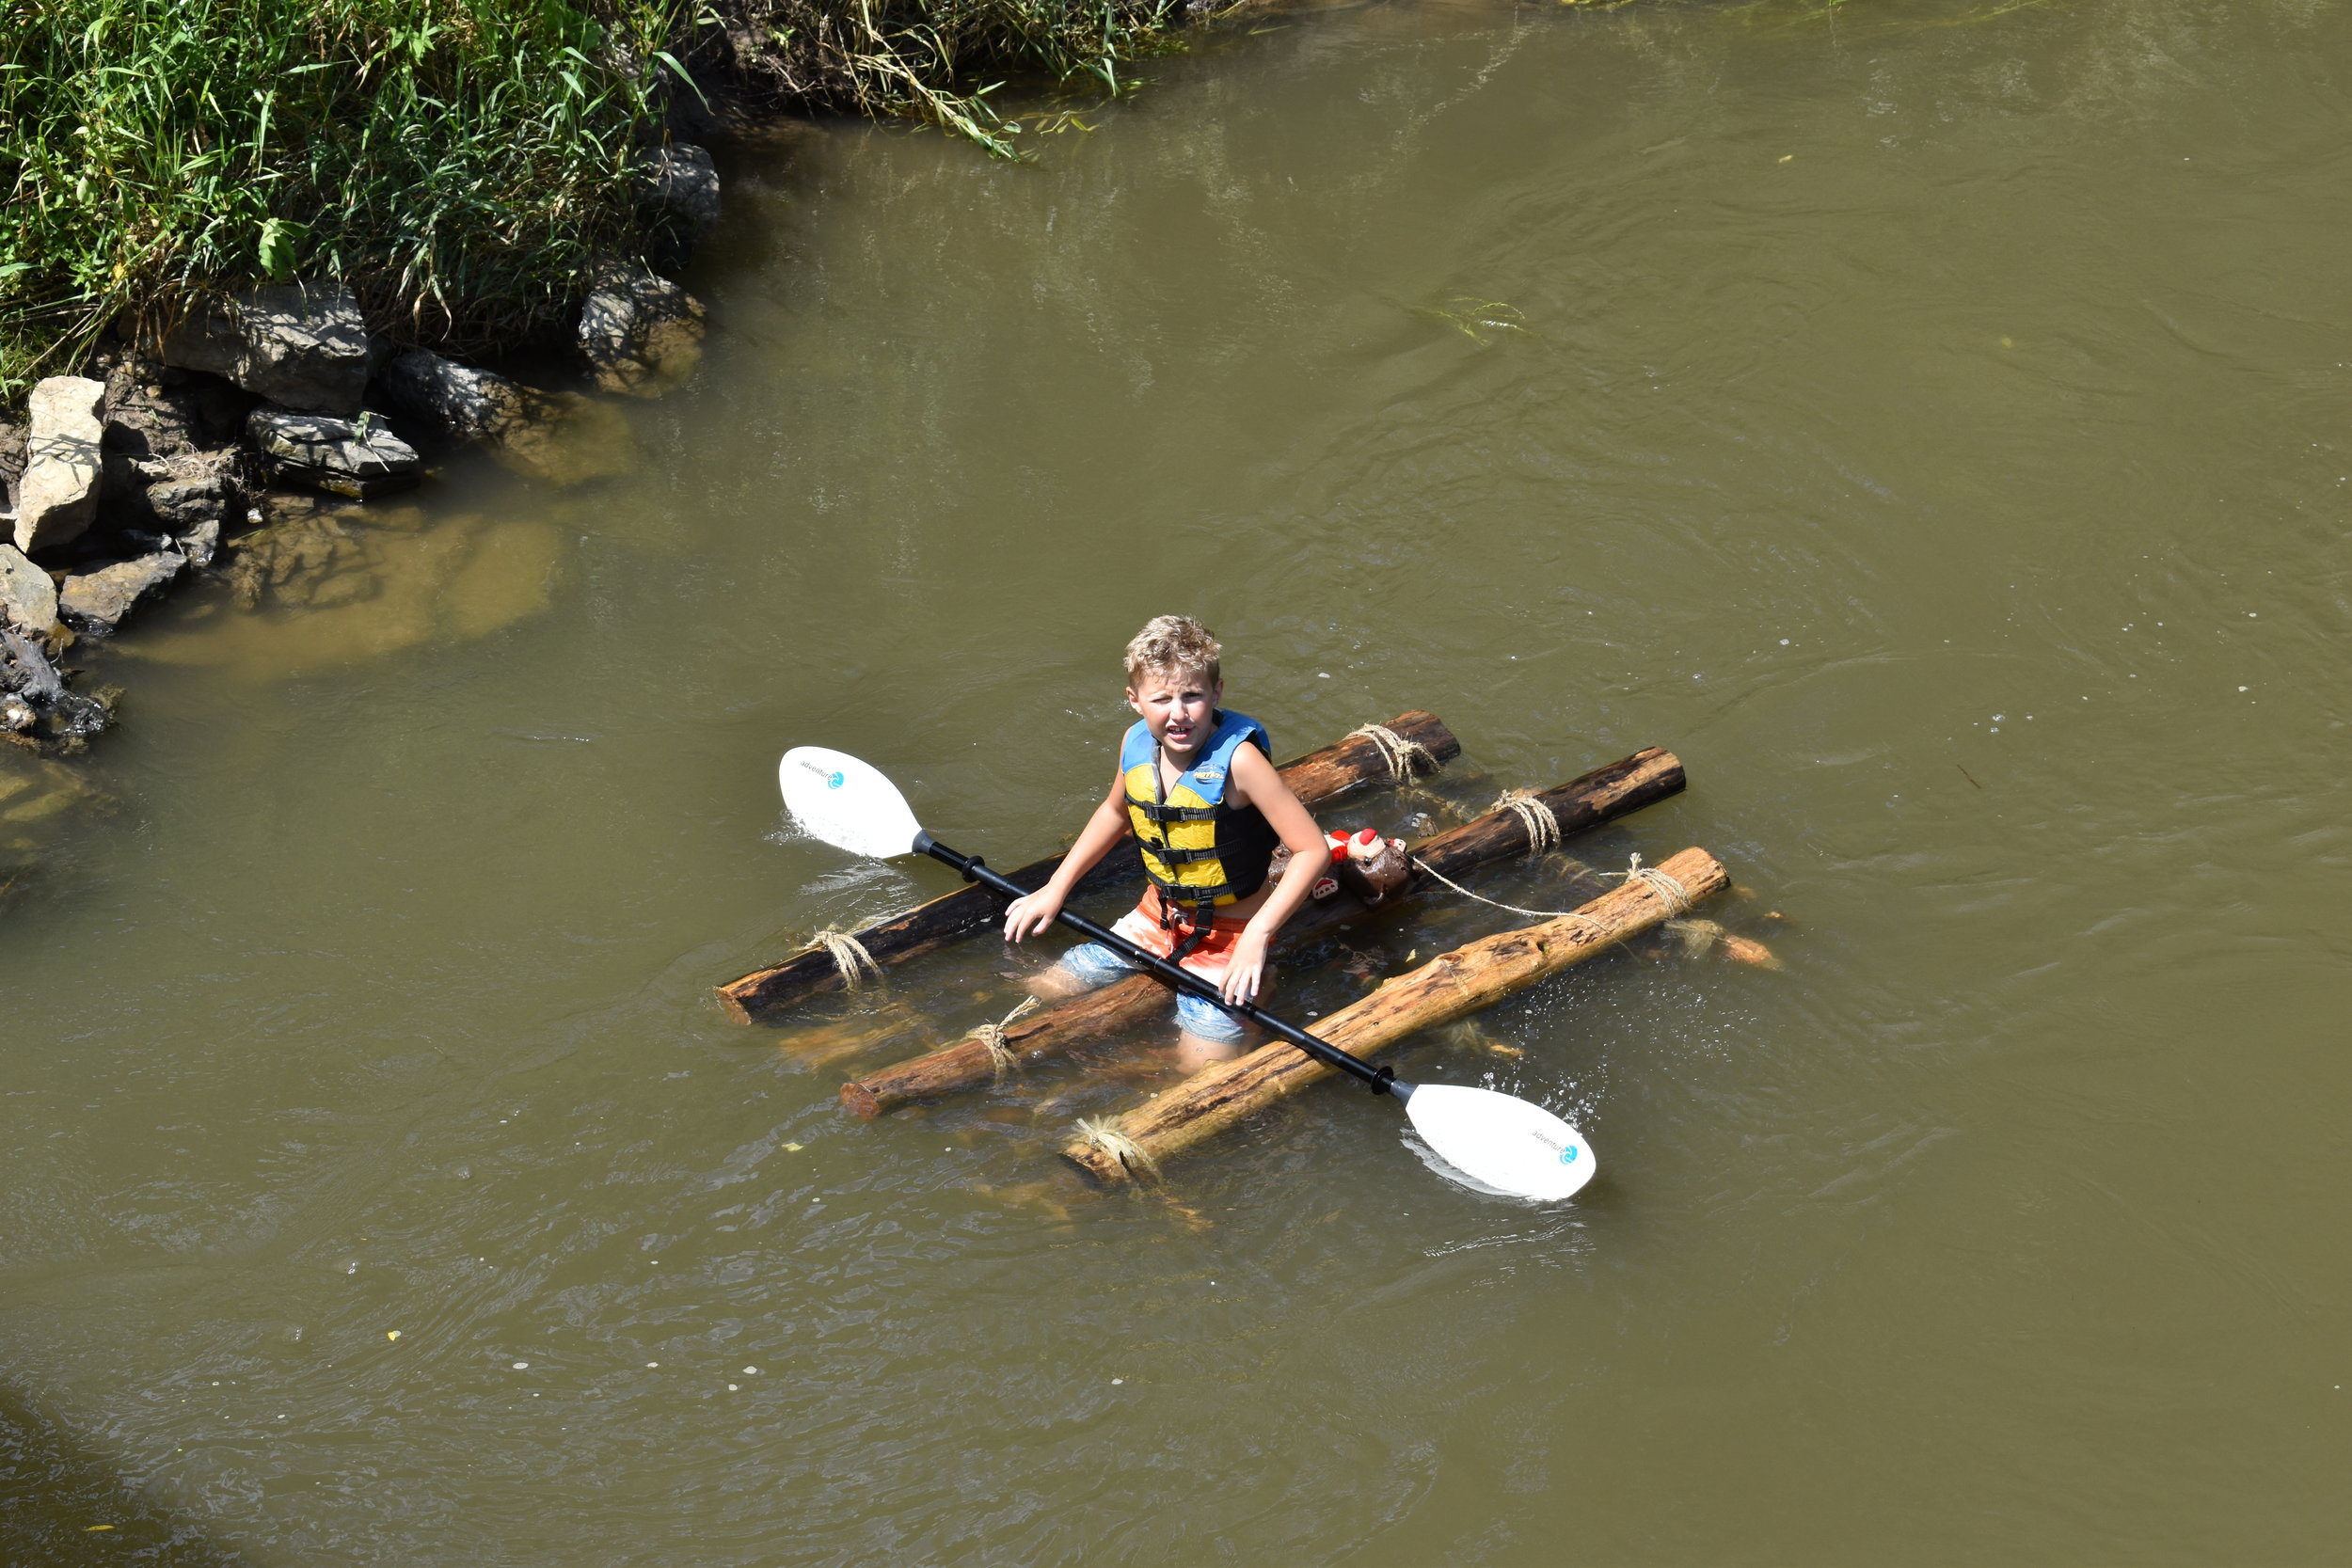  Hixson Katz finishing in first place, his brother not far behind in a canoe 